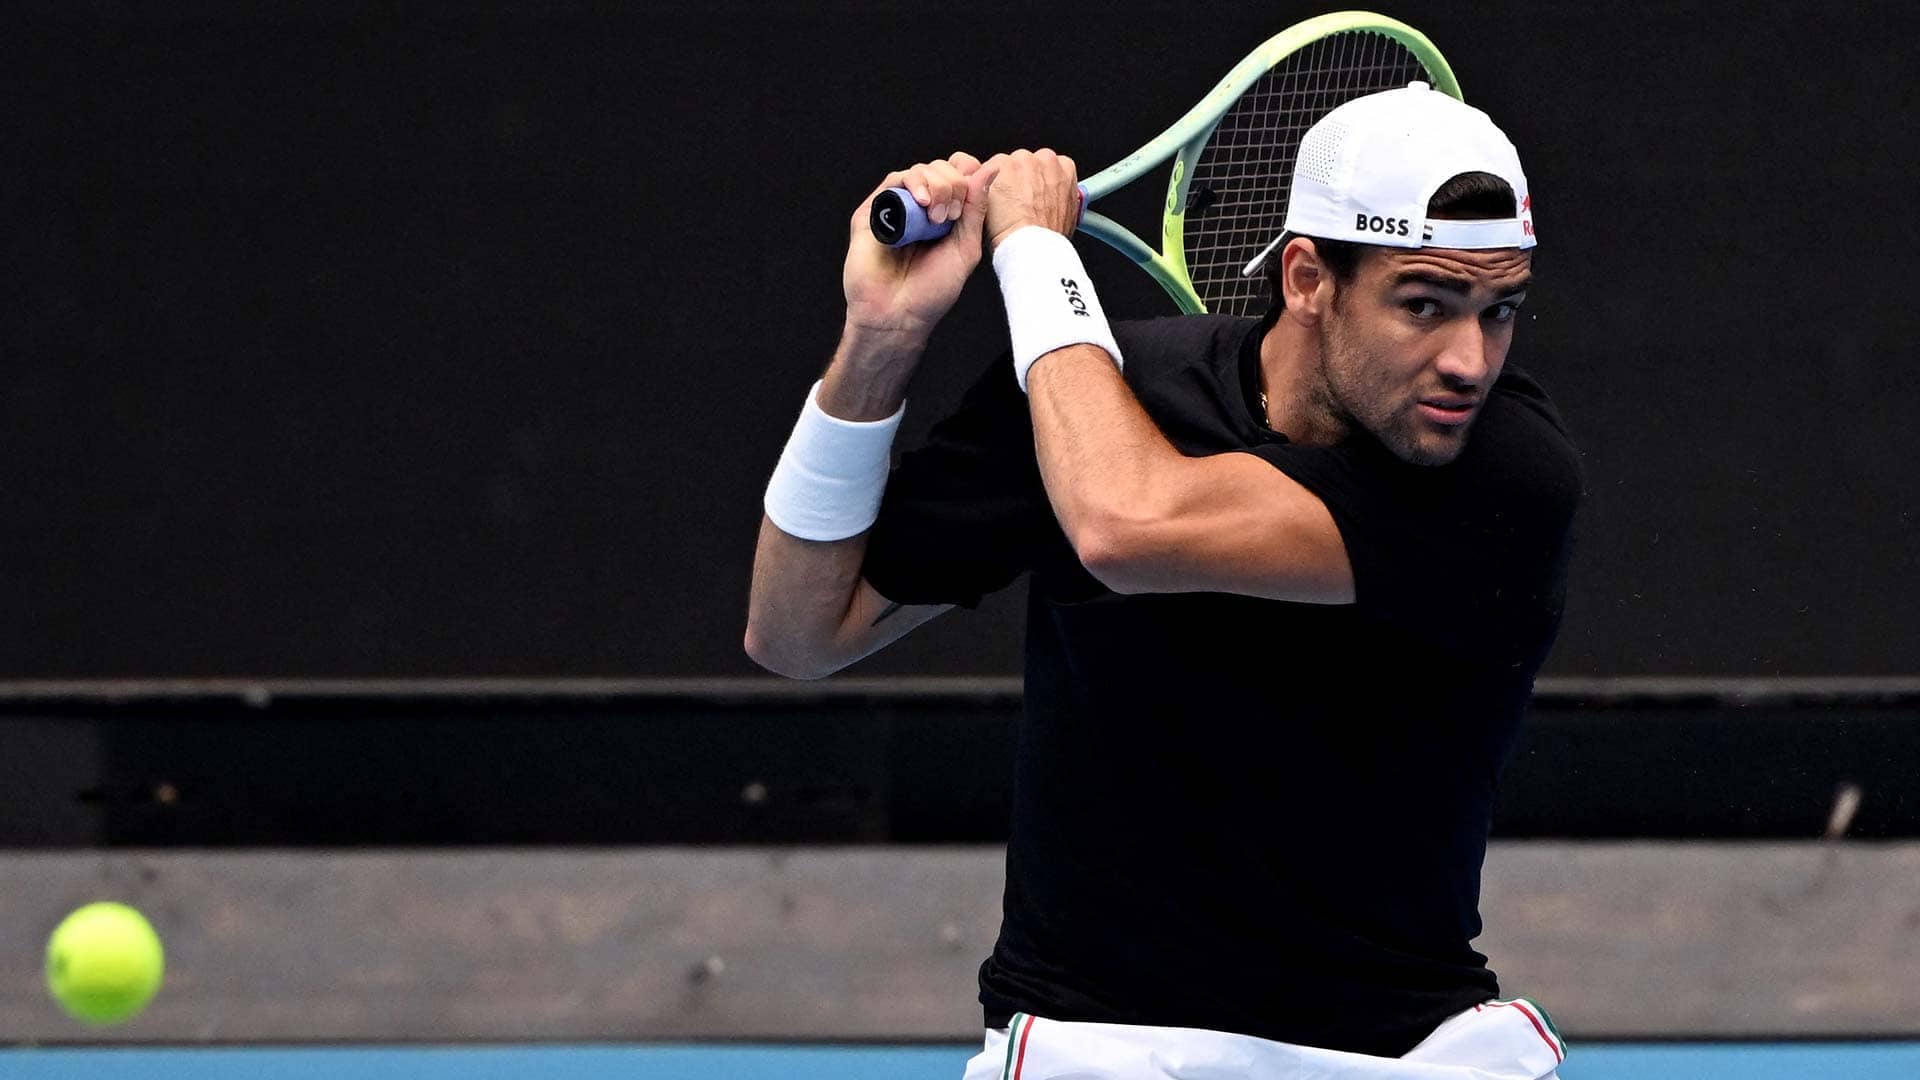 Matteo Berrettini practises in Melbourne ahead of his first-round Australian Open match against Andy Murray.